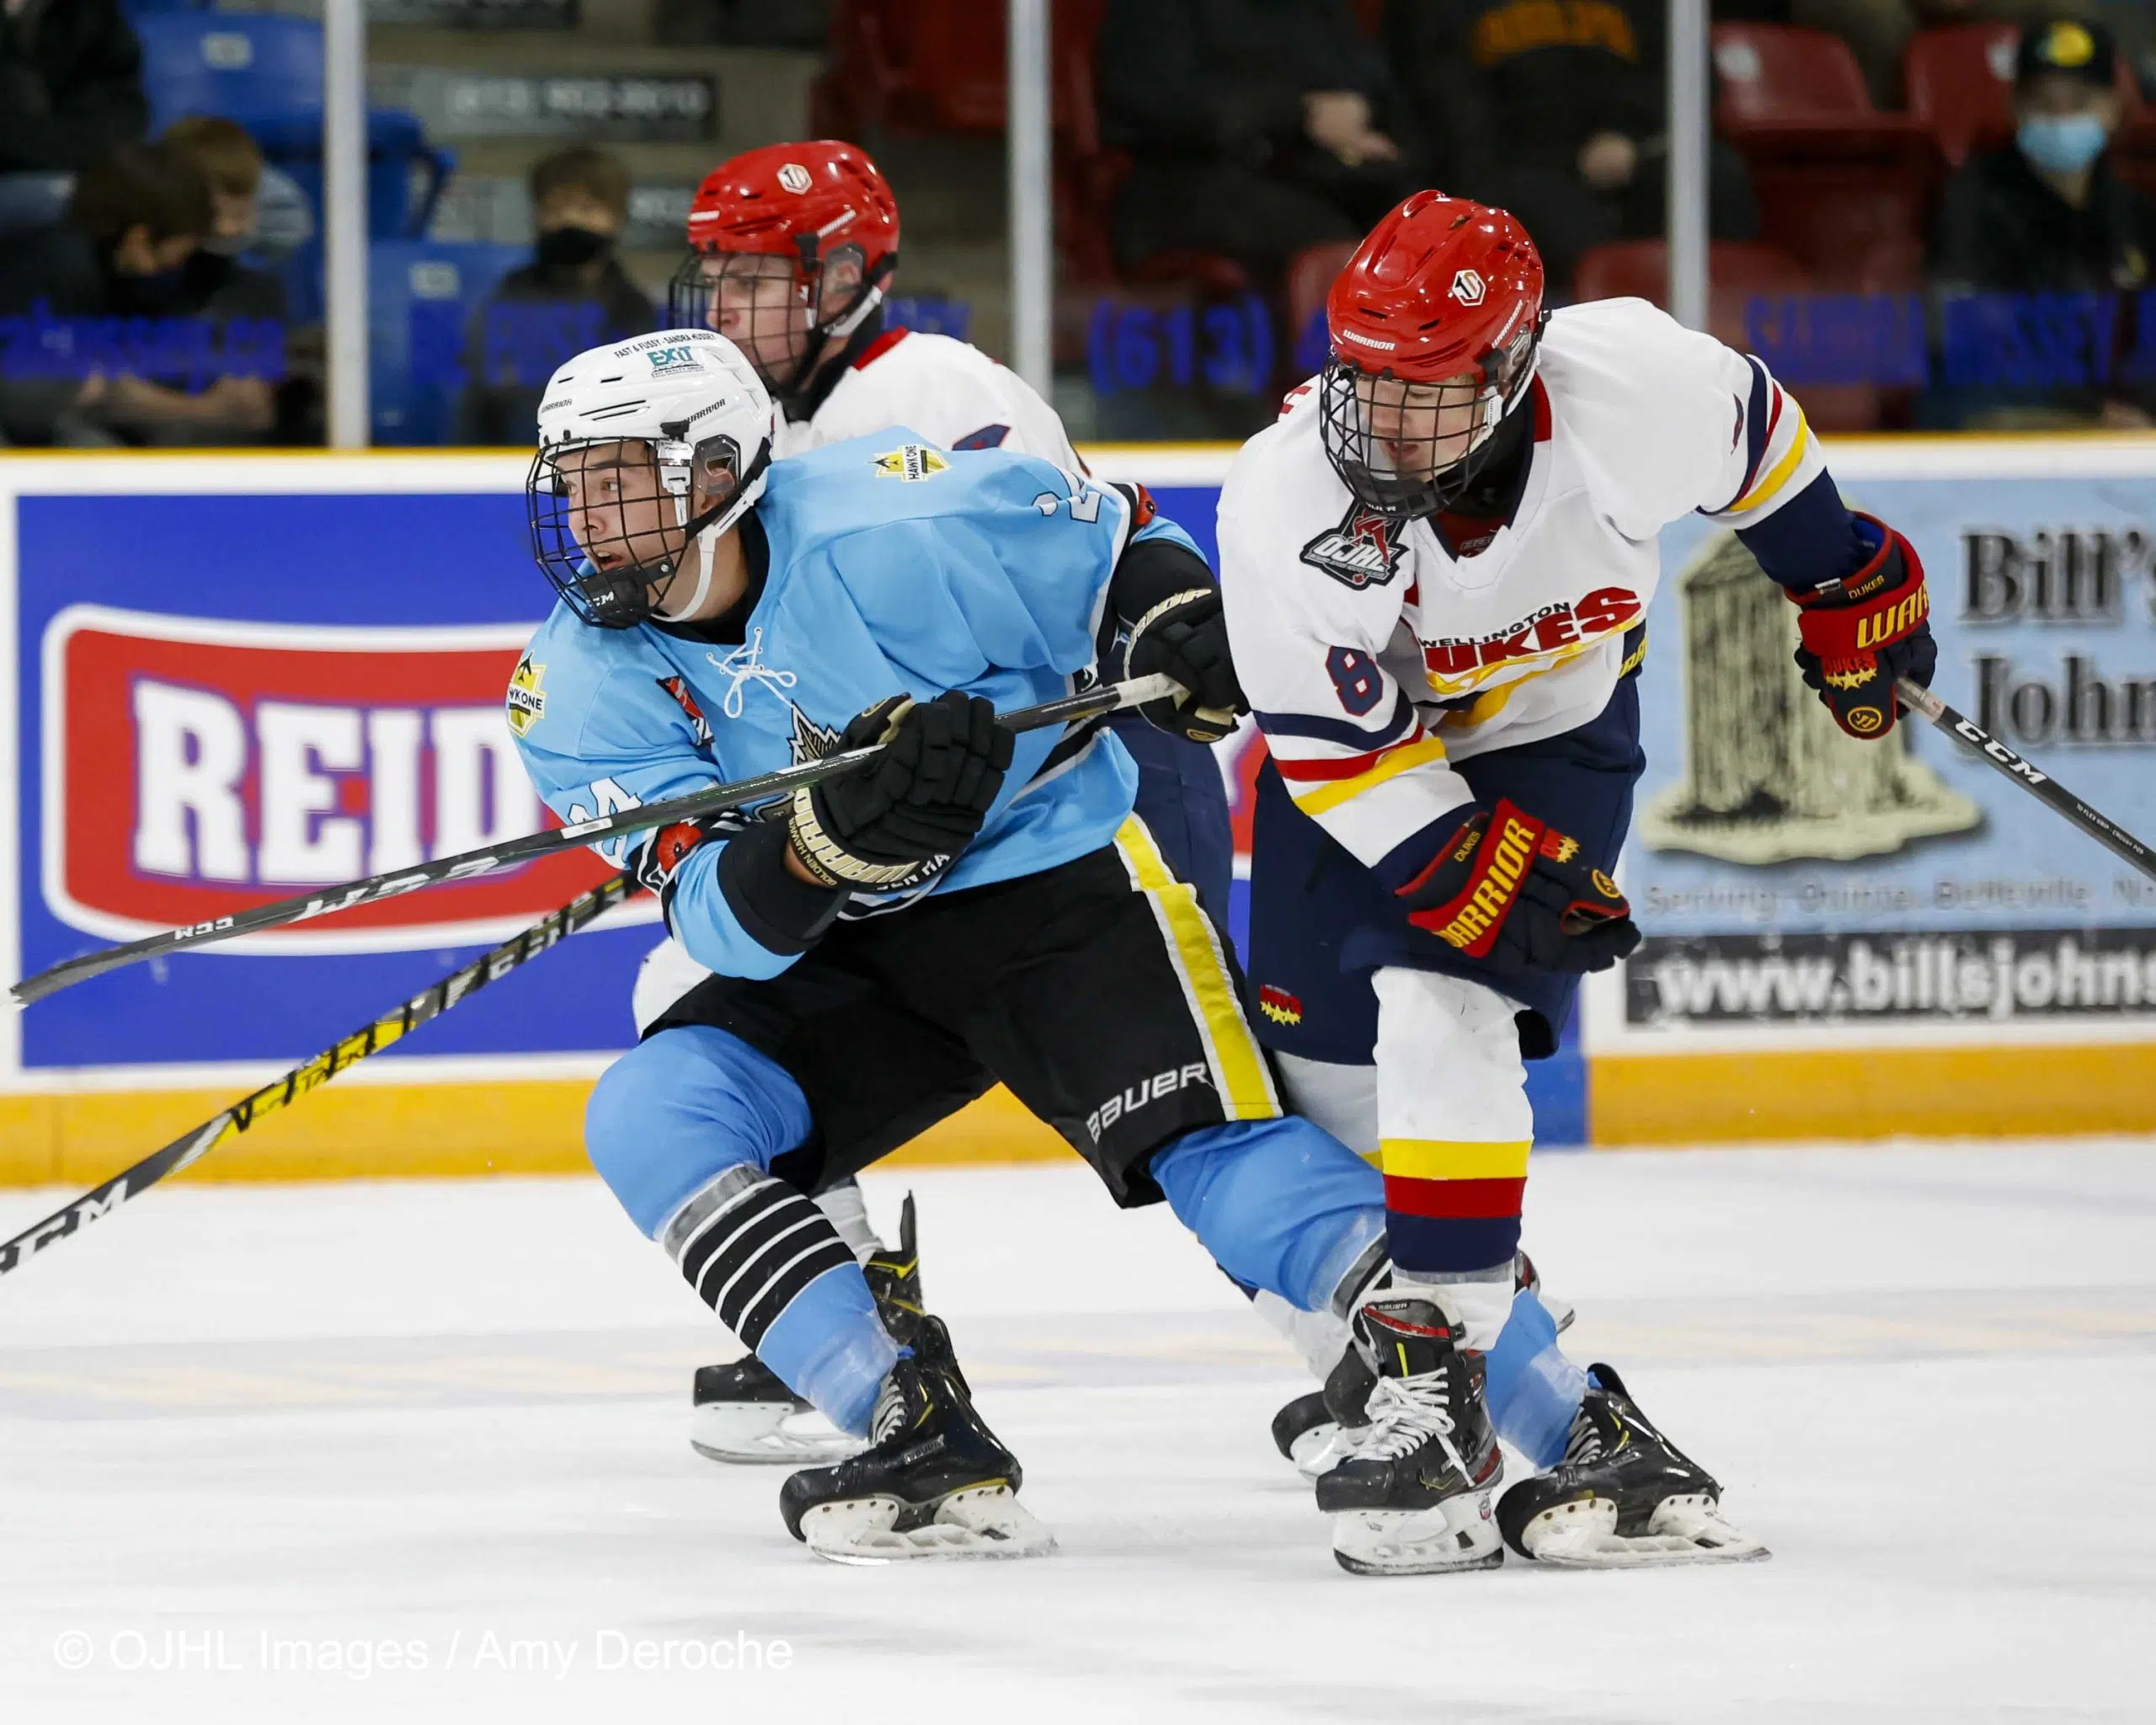 Dukes down Golden Hawks in game three of Hasty Ps Cup Series